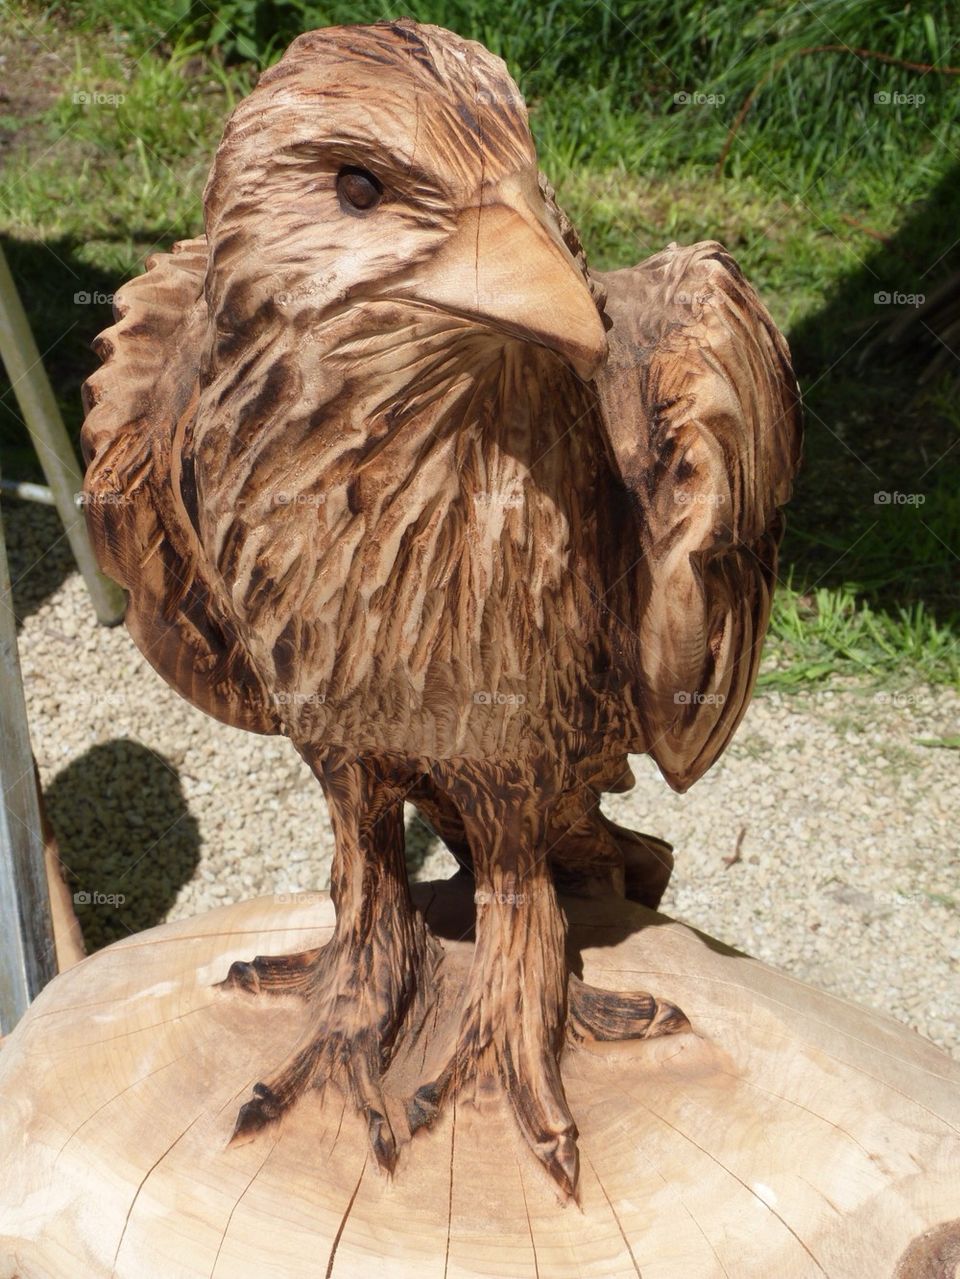 Wood carving of an eagle